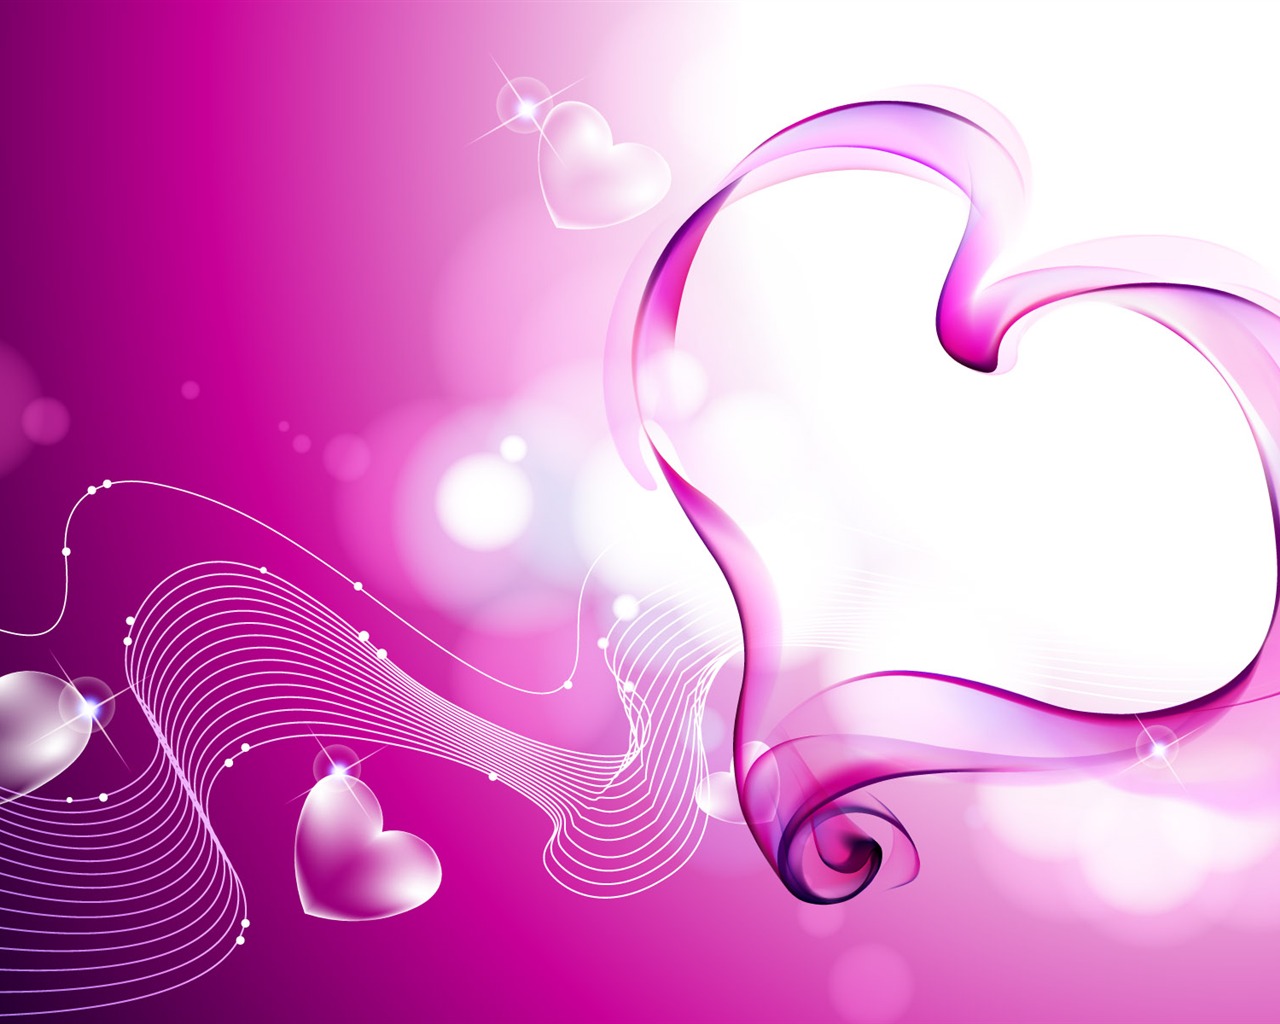 Valentine's Day Love Theme Wallpapers (3) #6 - 1280x1024